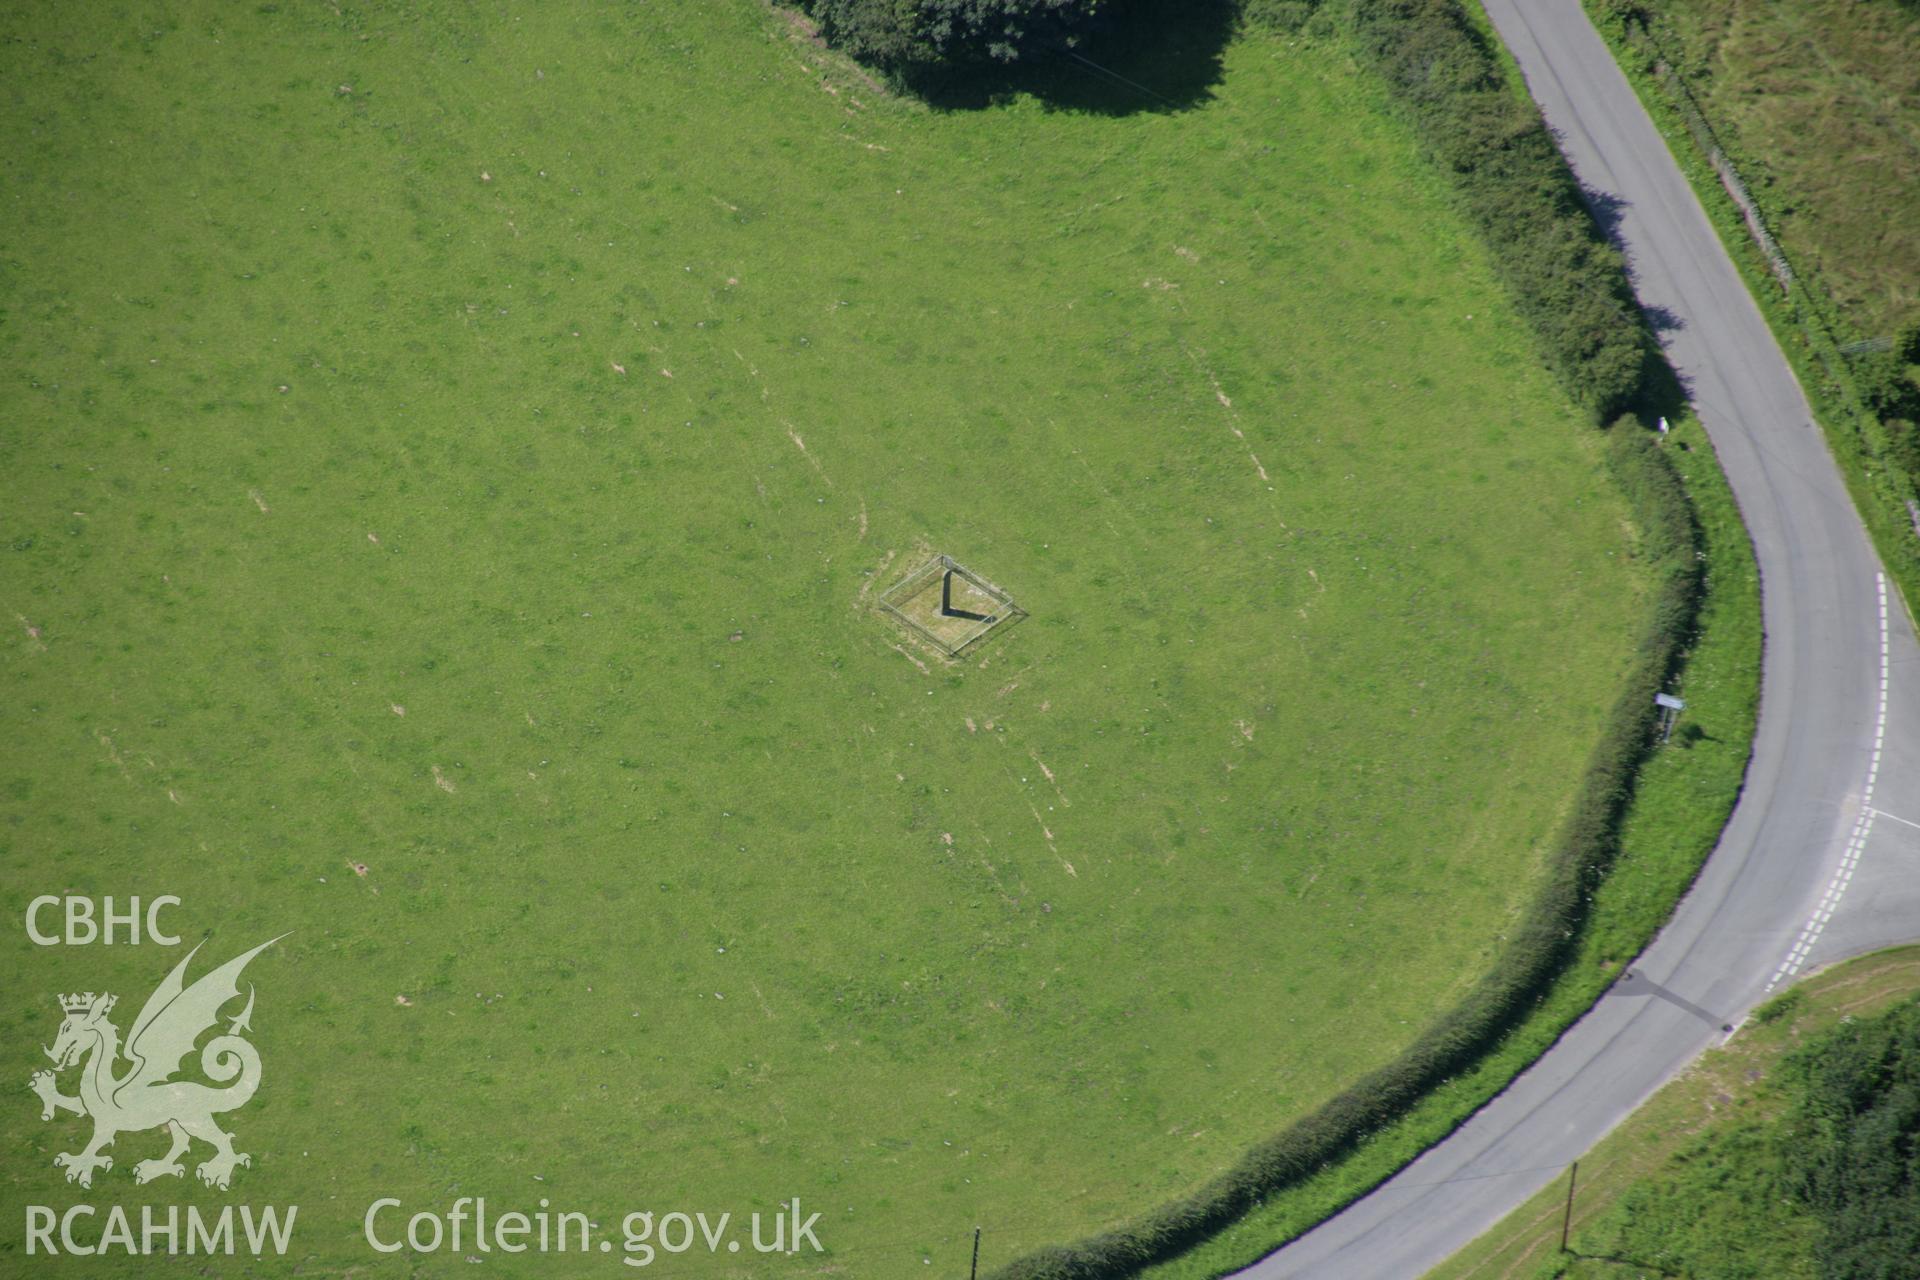 RCAHMW colour oblique aerial photograph of Maen Achwyfan Cross. Taken on 31 July 2007 by Toby Driver